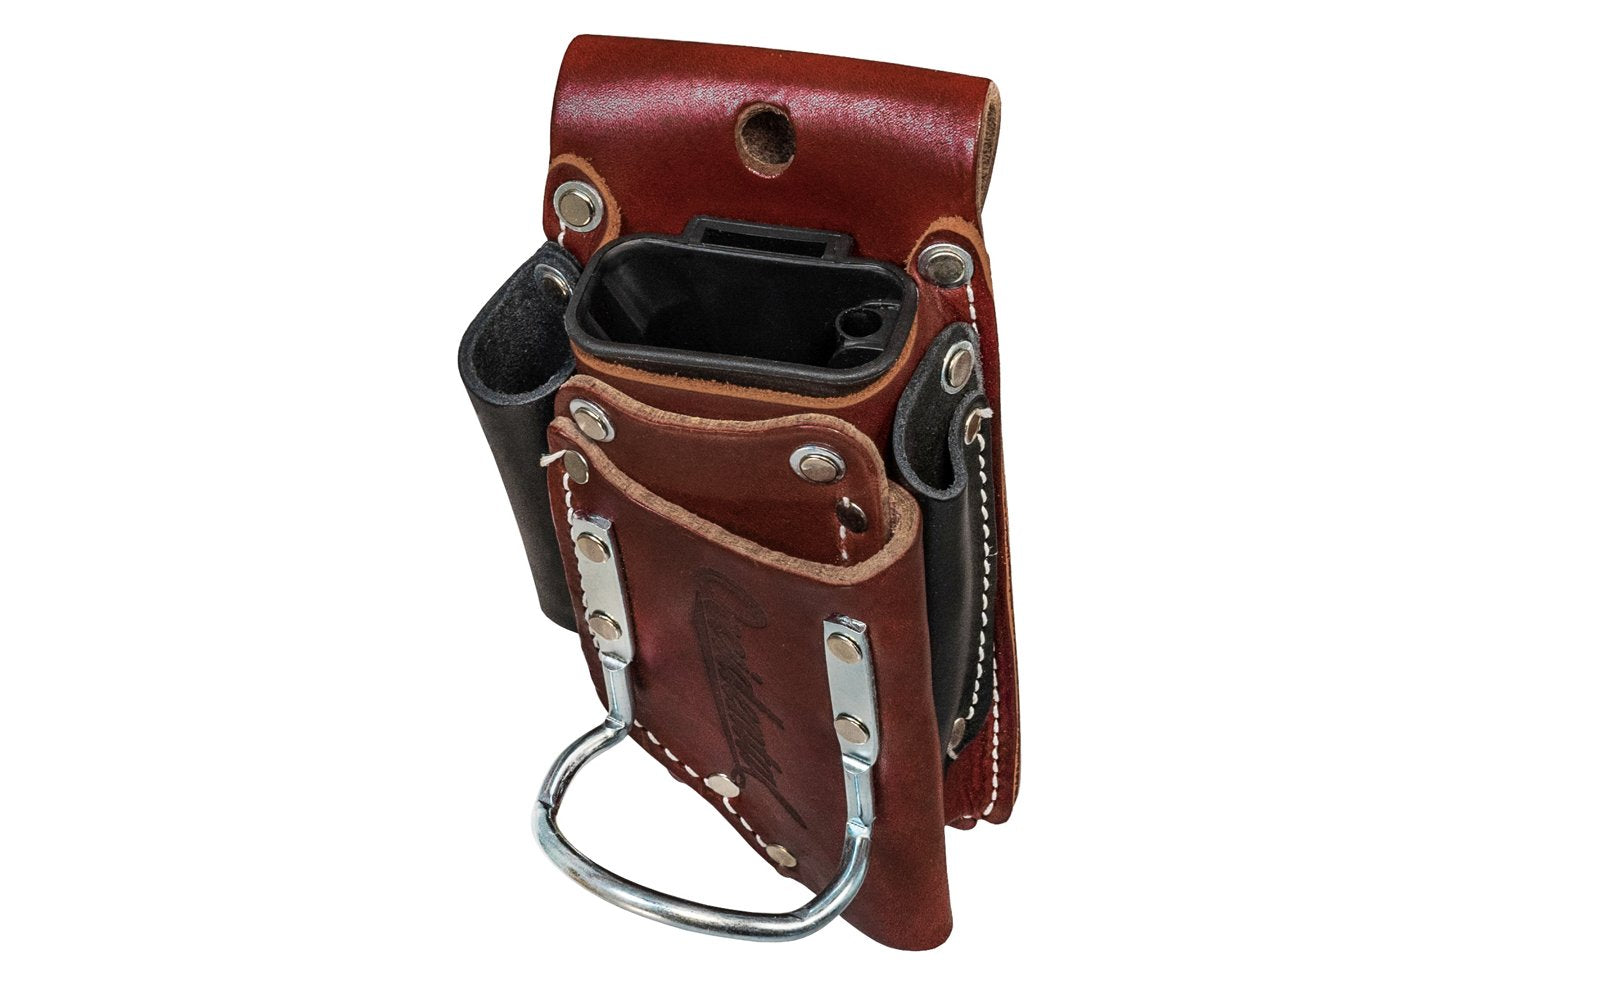 Occidental Leather 5-in-1 Tool & Hammer Holder Holster ~ 5520 - Made in USA ~ Made of Sturdy genuine Leather - 5-in-1 holster - 4" Projection  - 5-in-1 Holder -  Holster - Offers holders for hammer, lumber crayon or screw driver, pliers